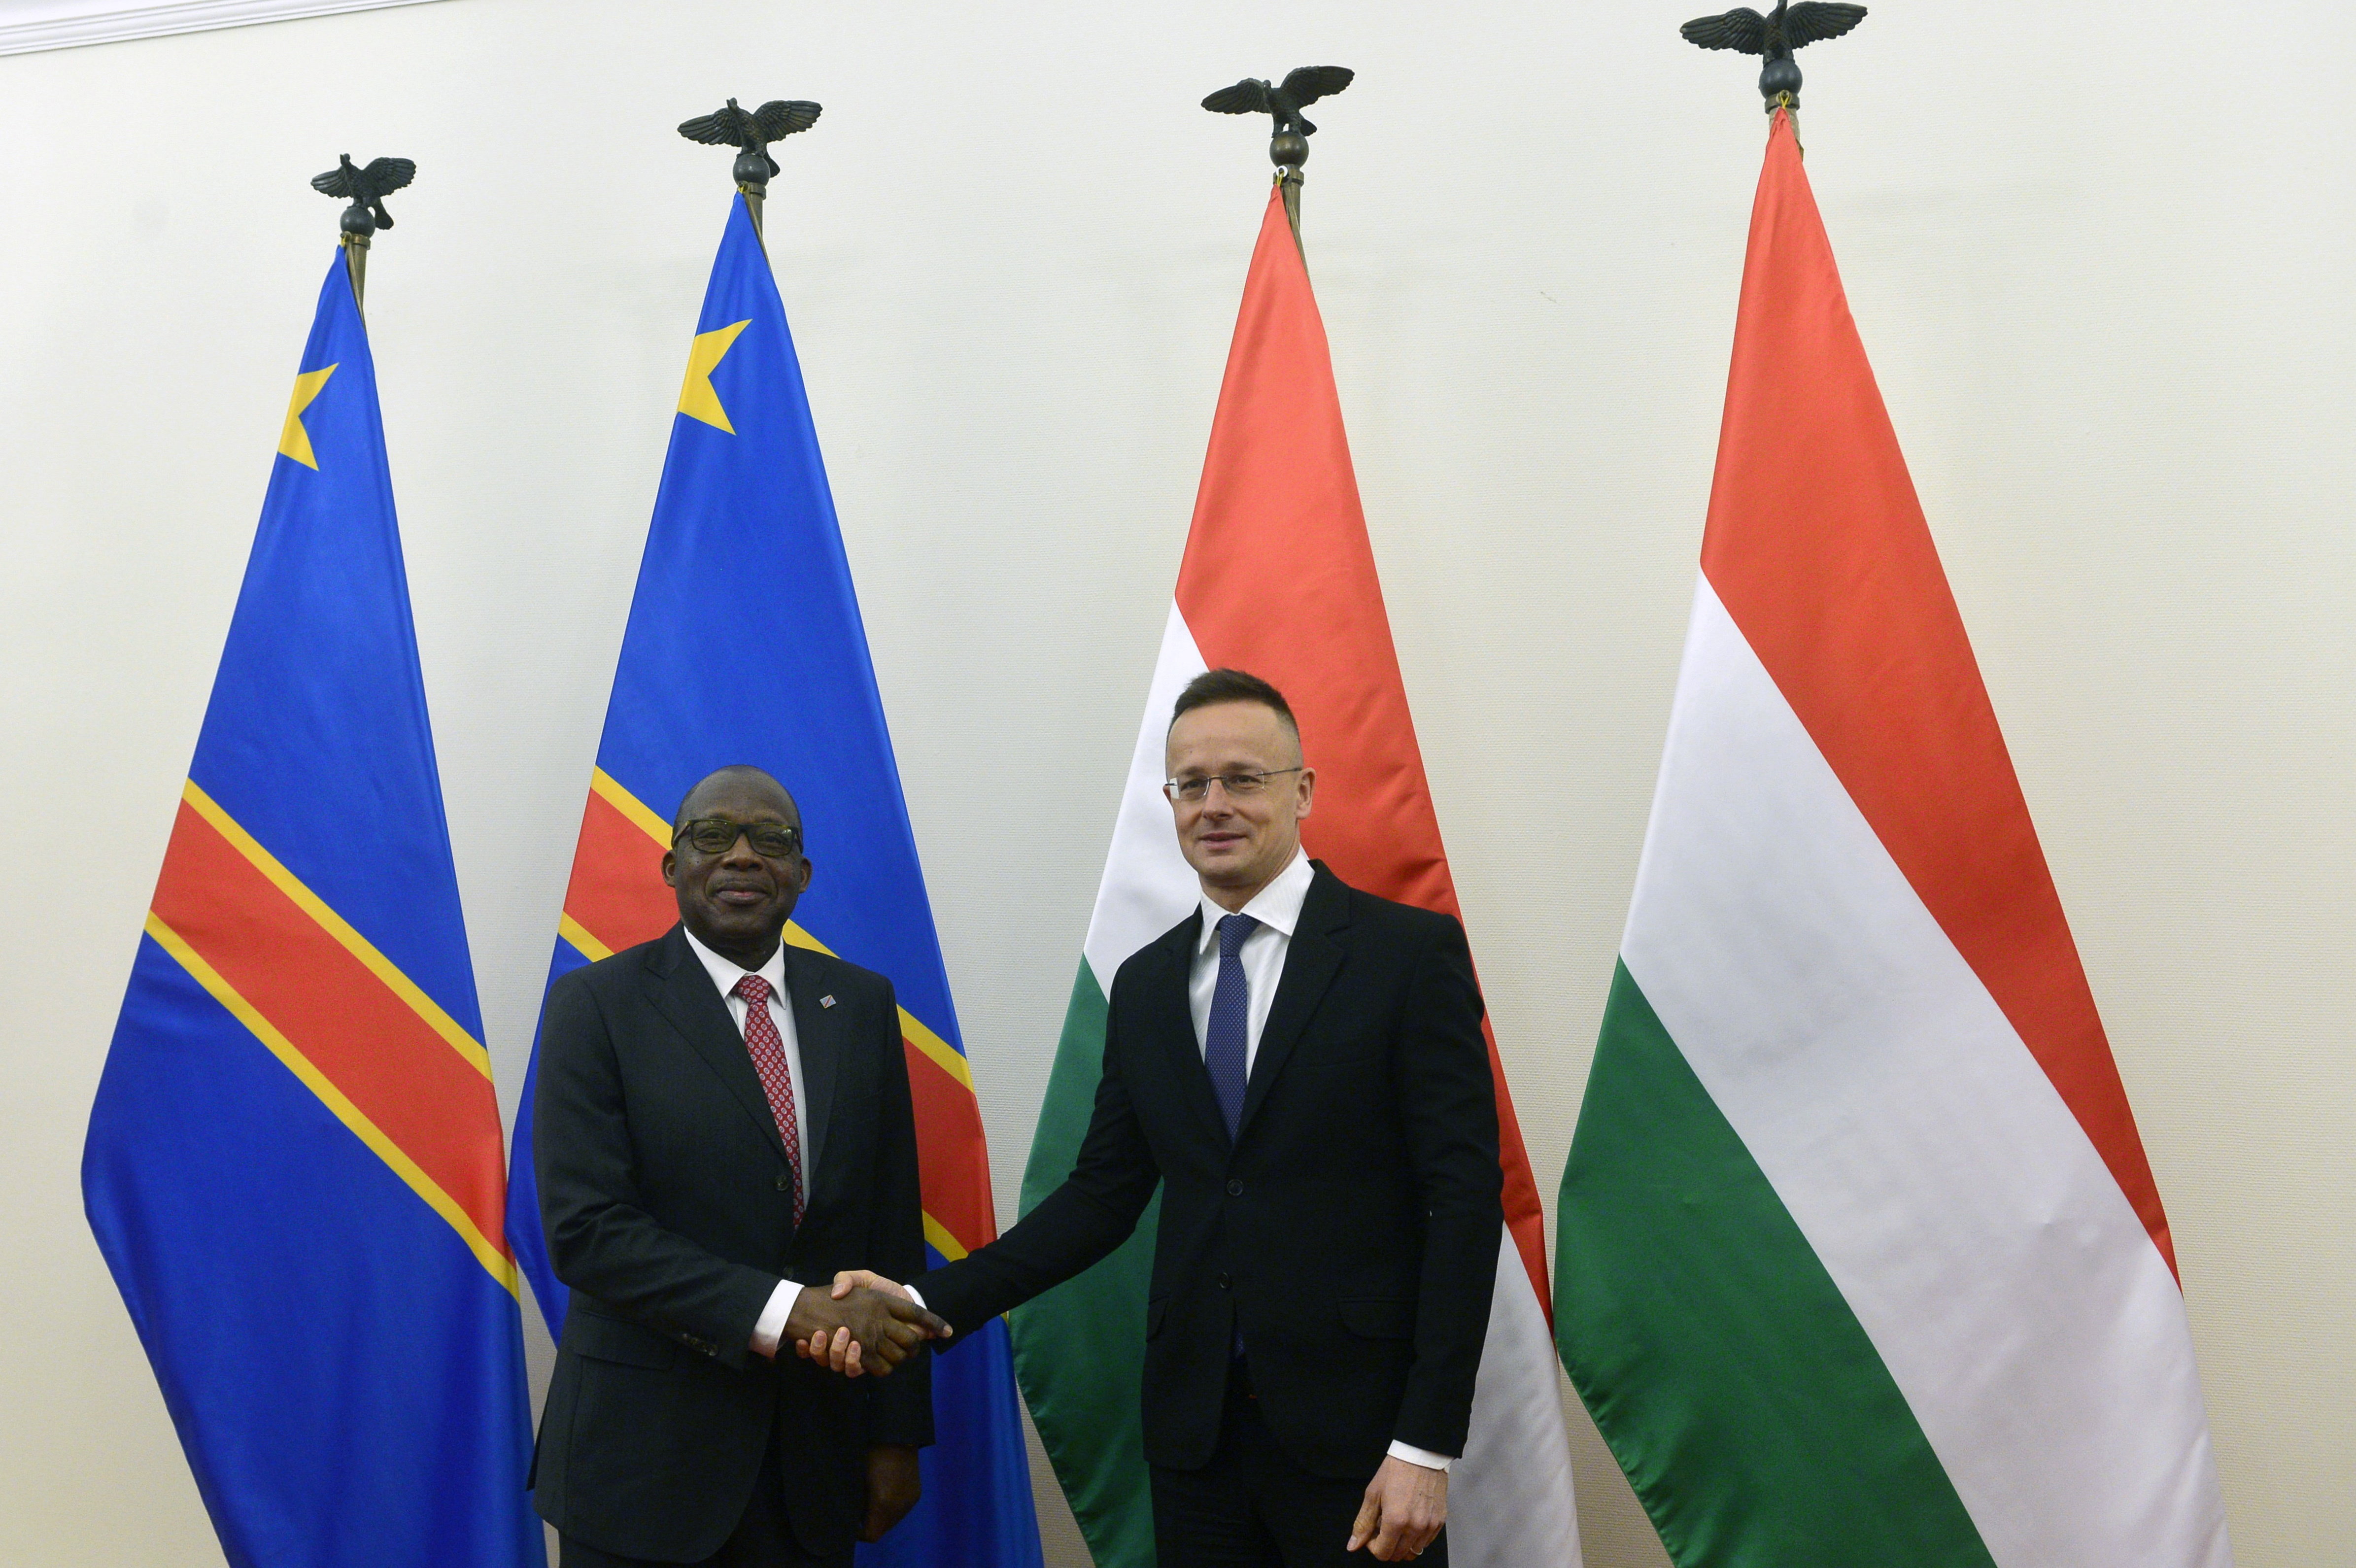 Szijjártó Meets With Congolese Counterpart in Budapest